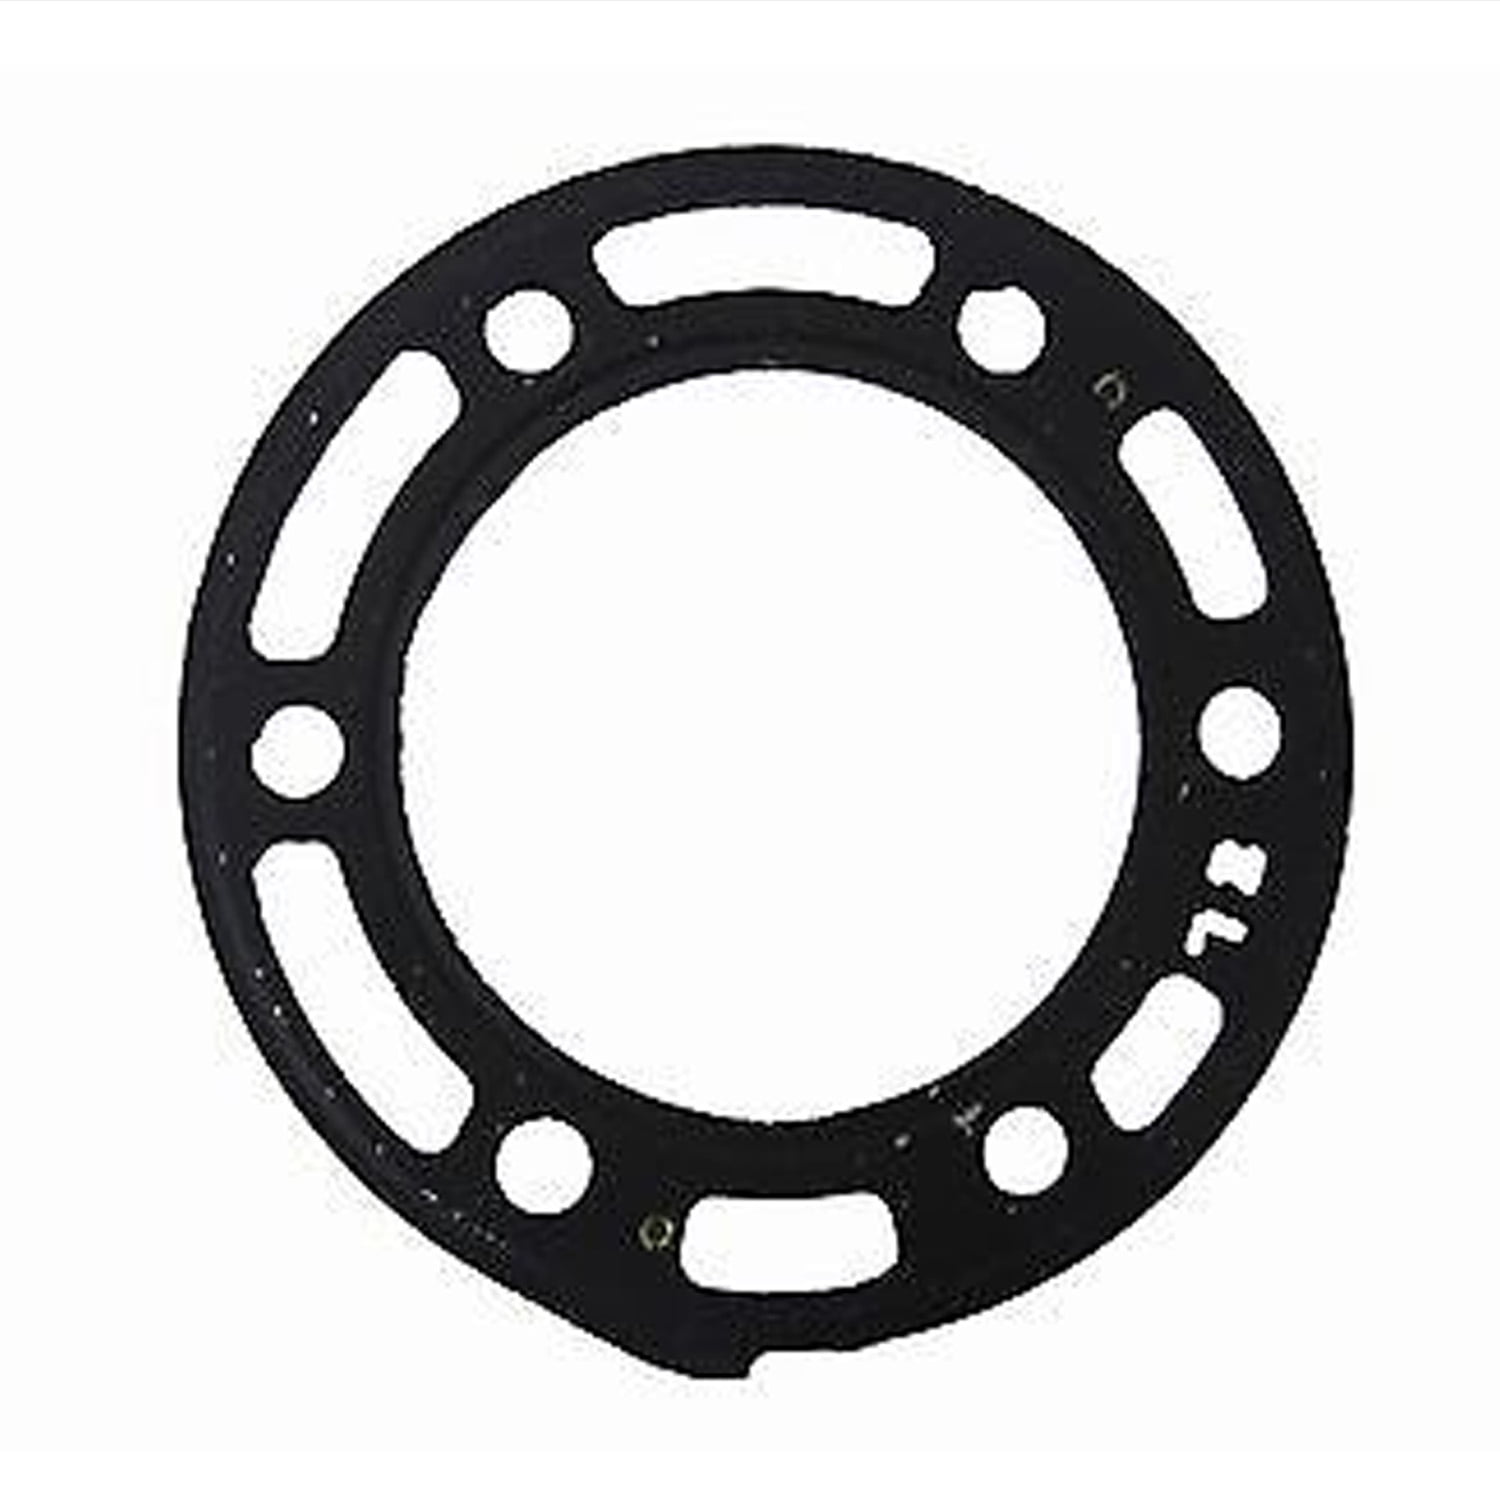 Pack of 4 5410817 New OEM OBS Polaris Personal Watercraft O-Rings 